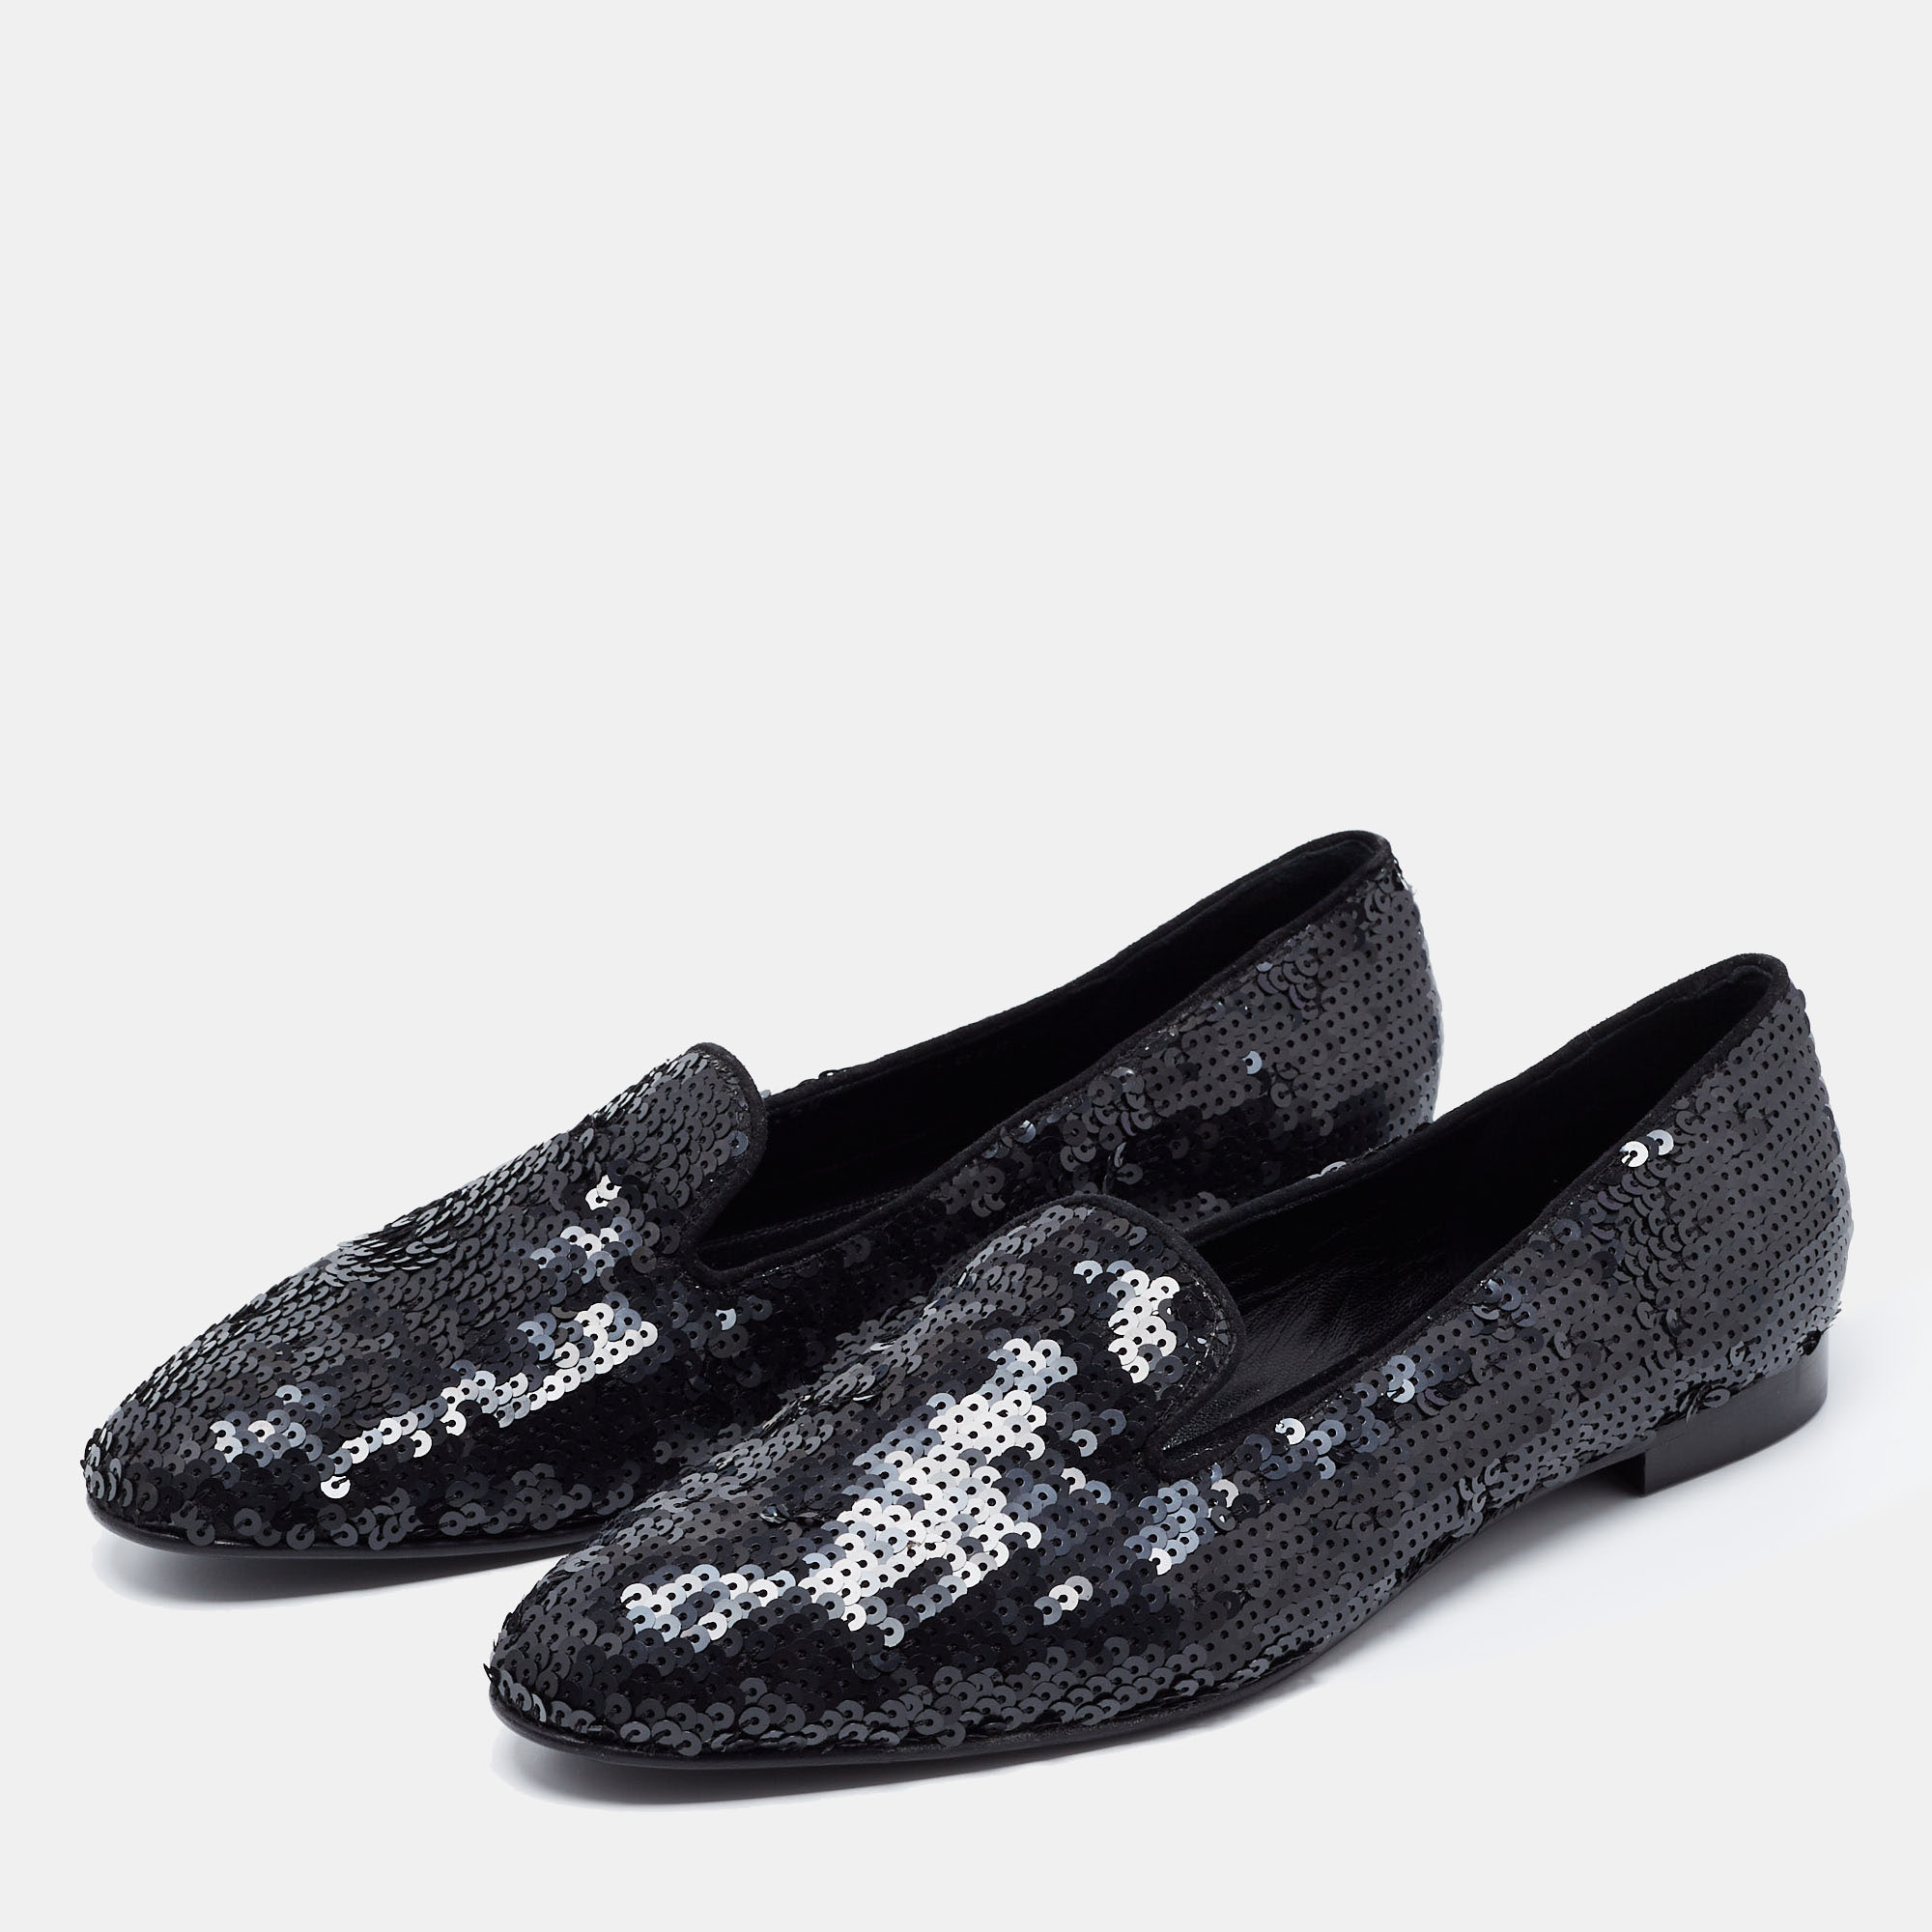 

Ralph Lauren Collection Black Sequin Slip on Loafers Size